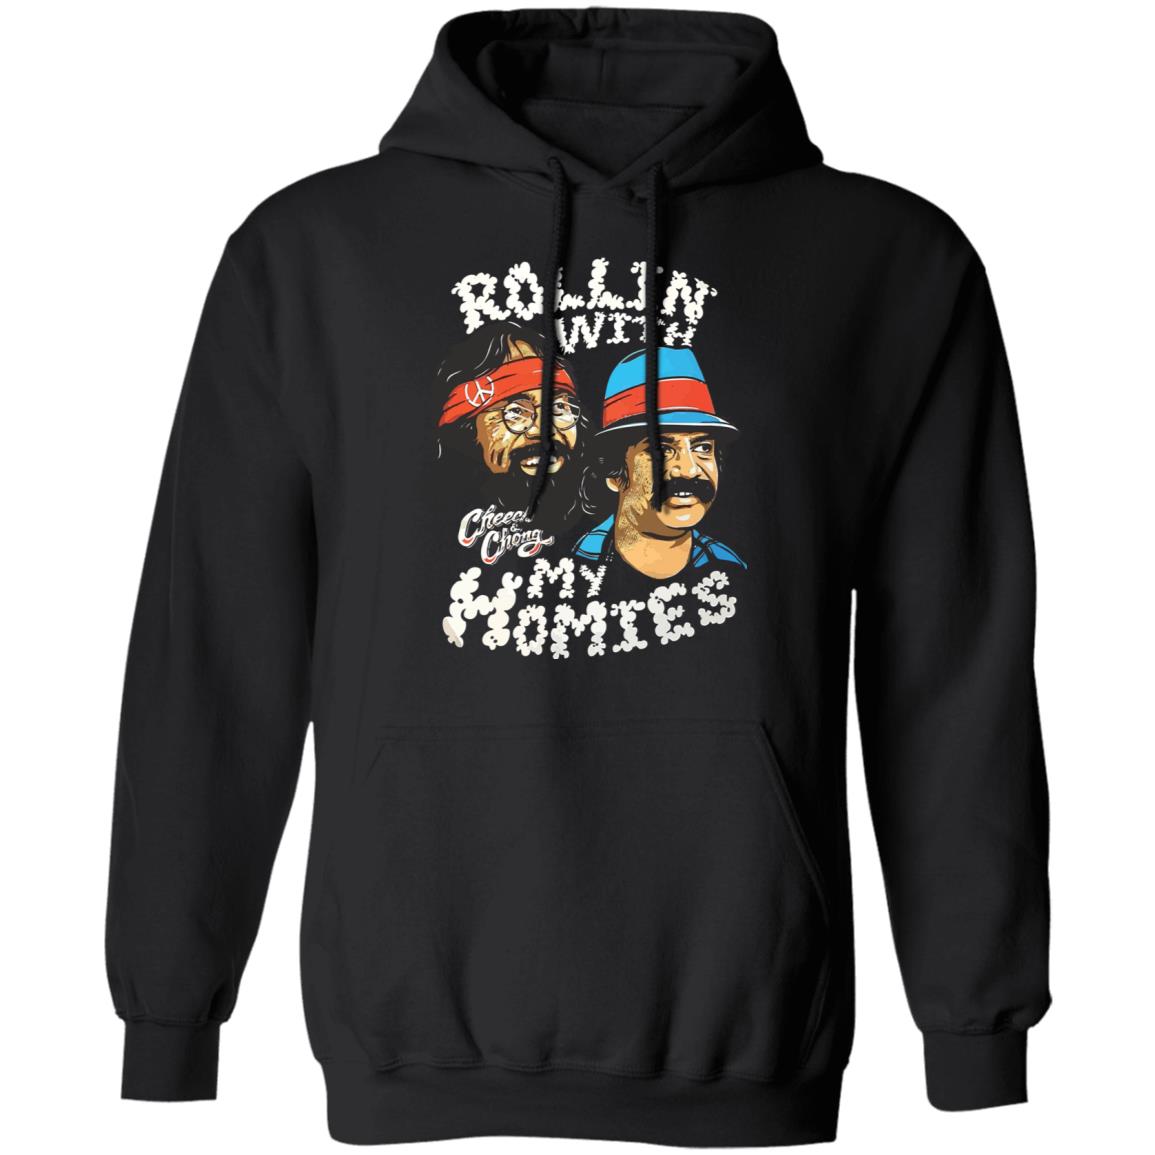 Cheech And Chong Rolling With My Homies Shirt 1